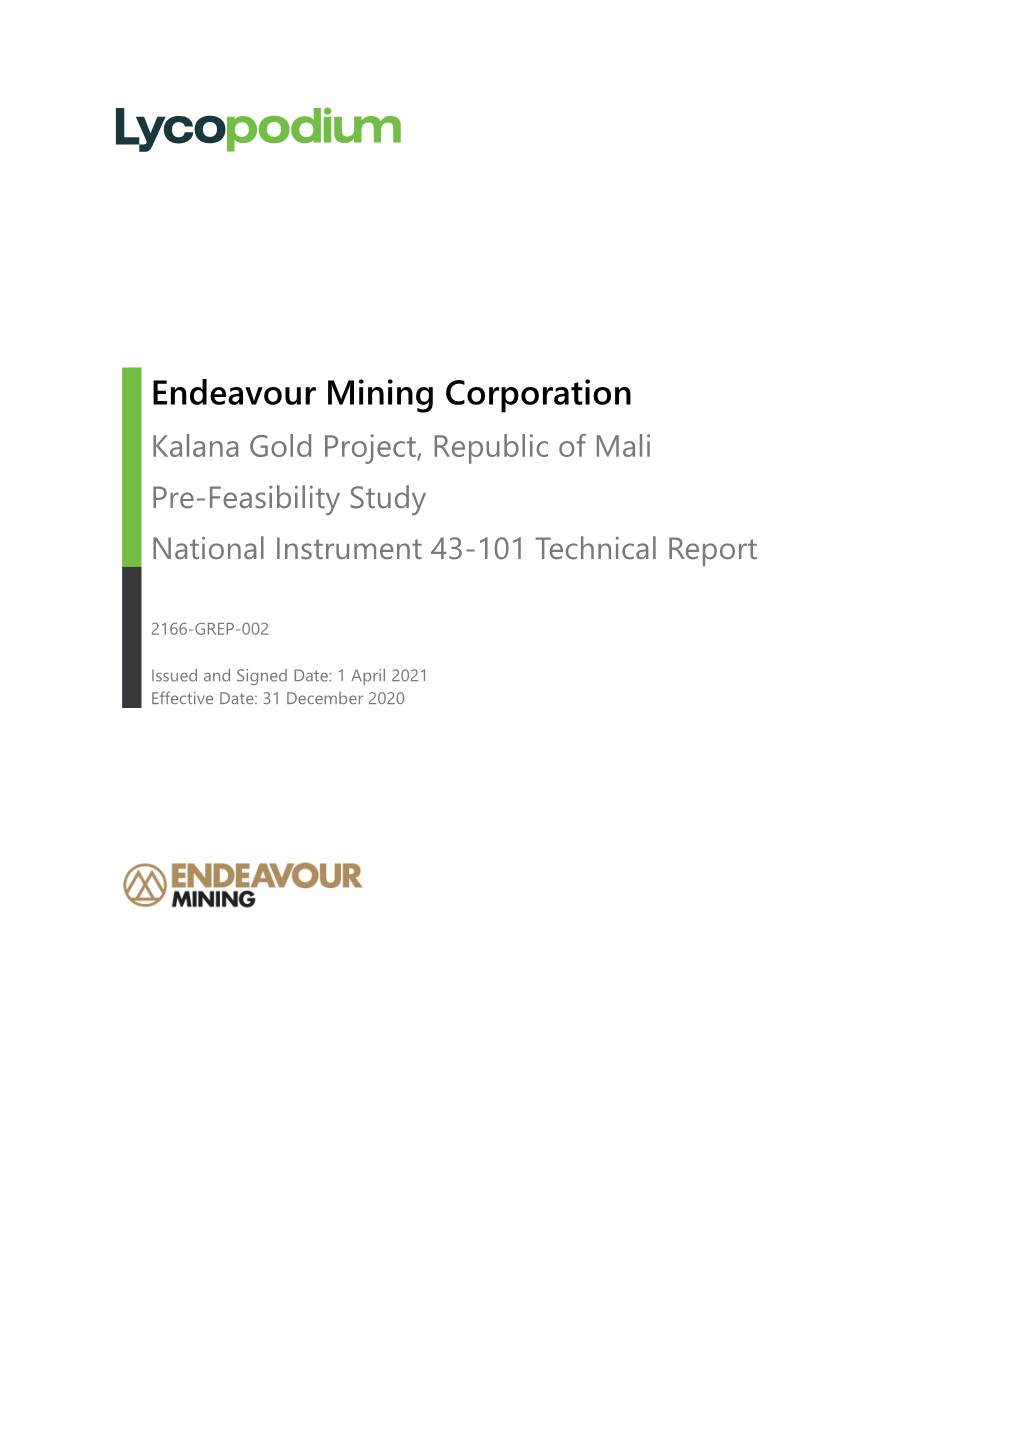 Endeavour Mining Corporation Kalana Gold Project, Republic of Mali Pre-Feasibility Study National Instrument 43-101 Technical Report